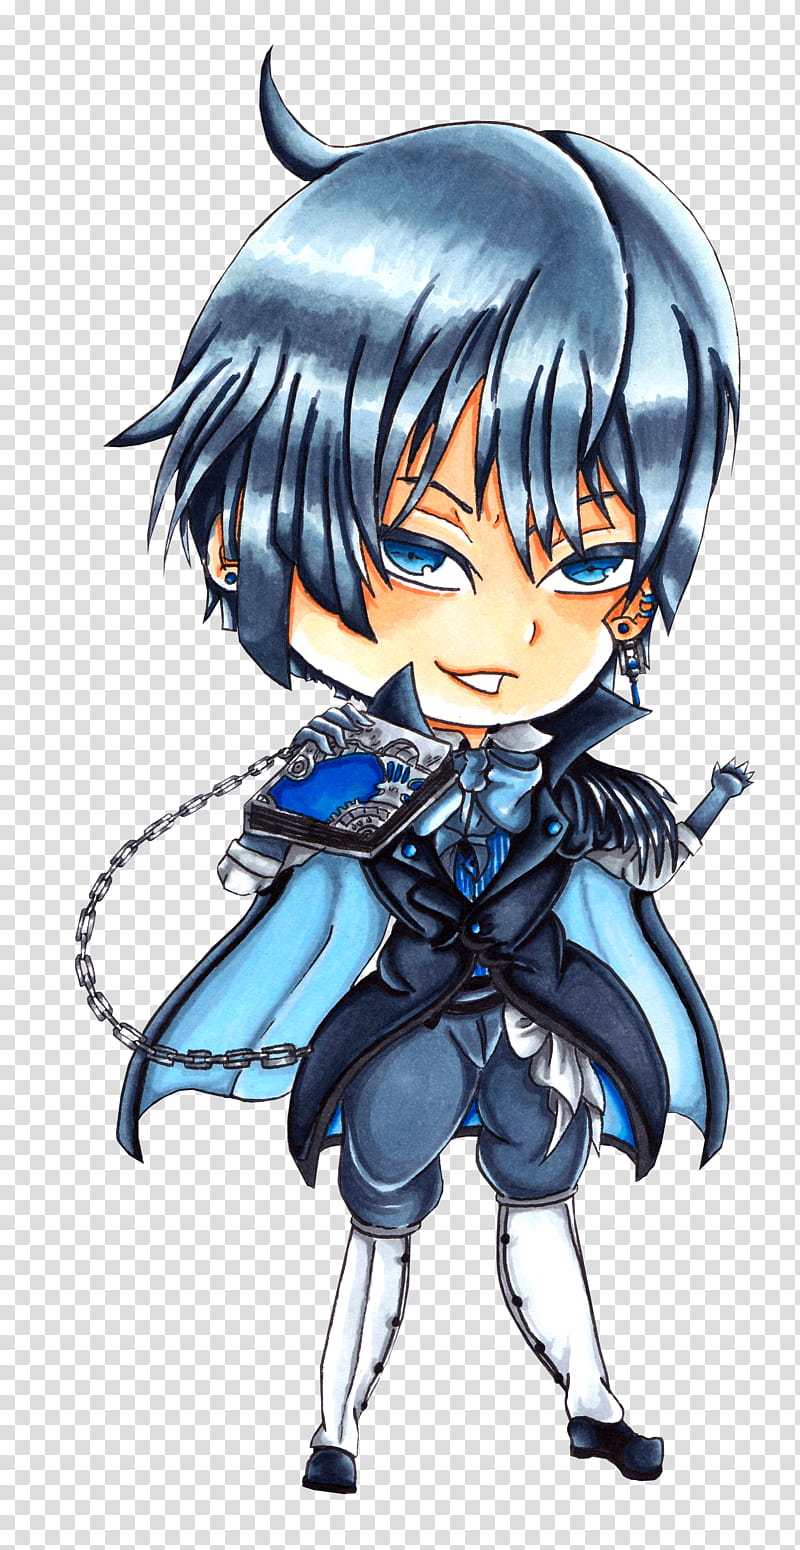 VnC Chibi Vanitas, blue-haired woman anime character illustration transparent background PNG clipart